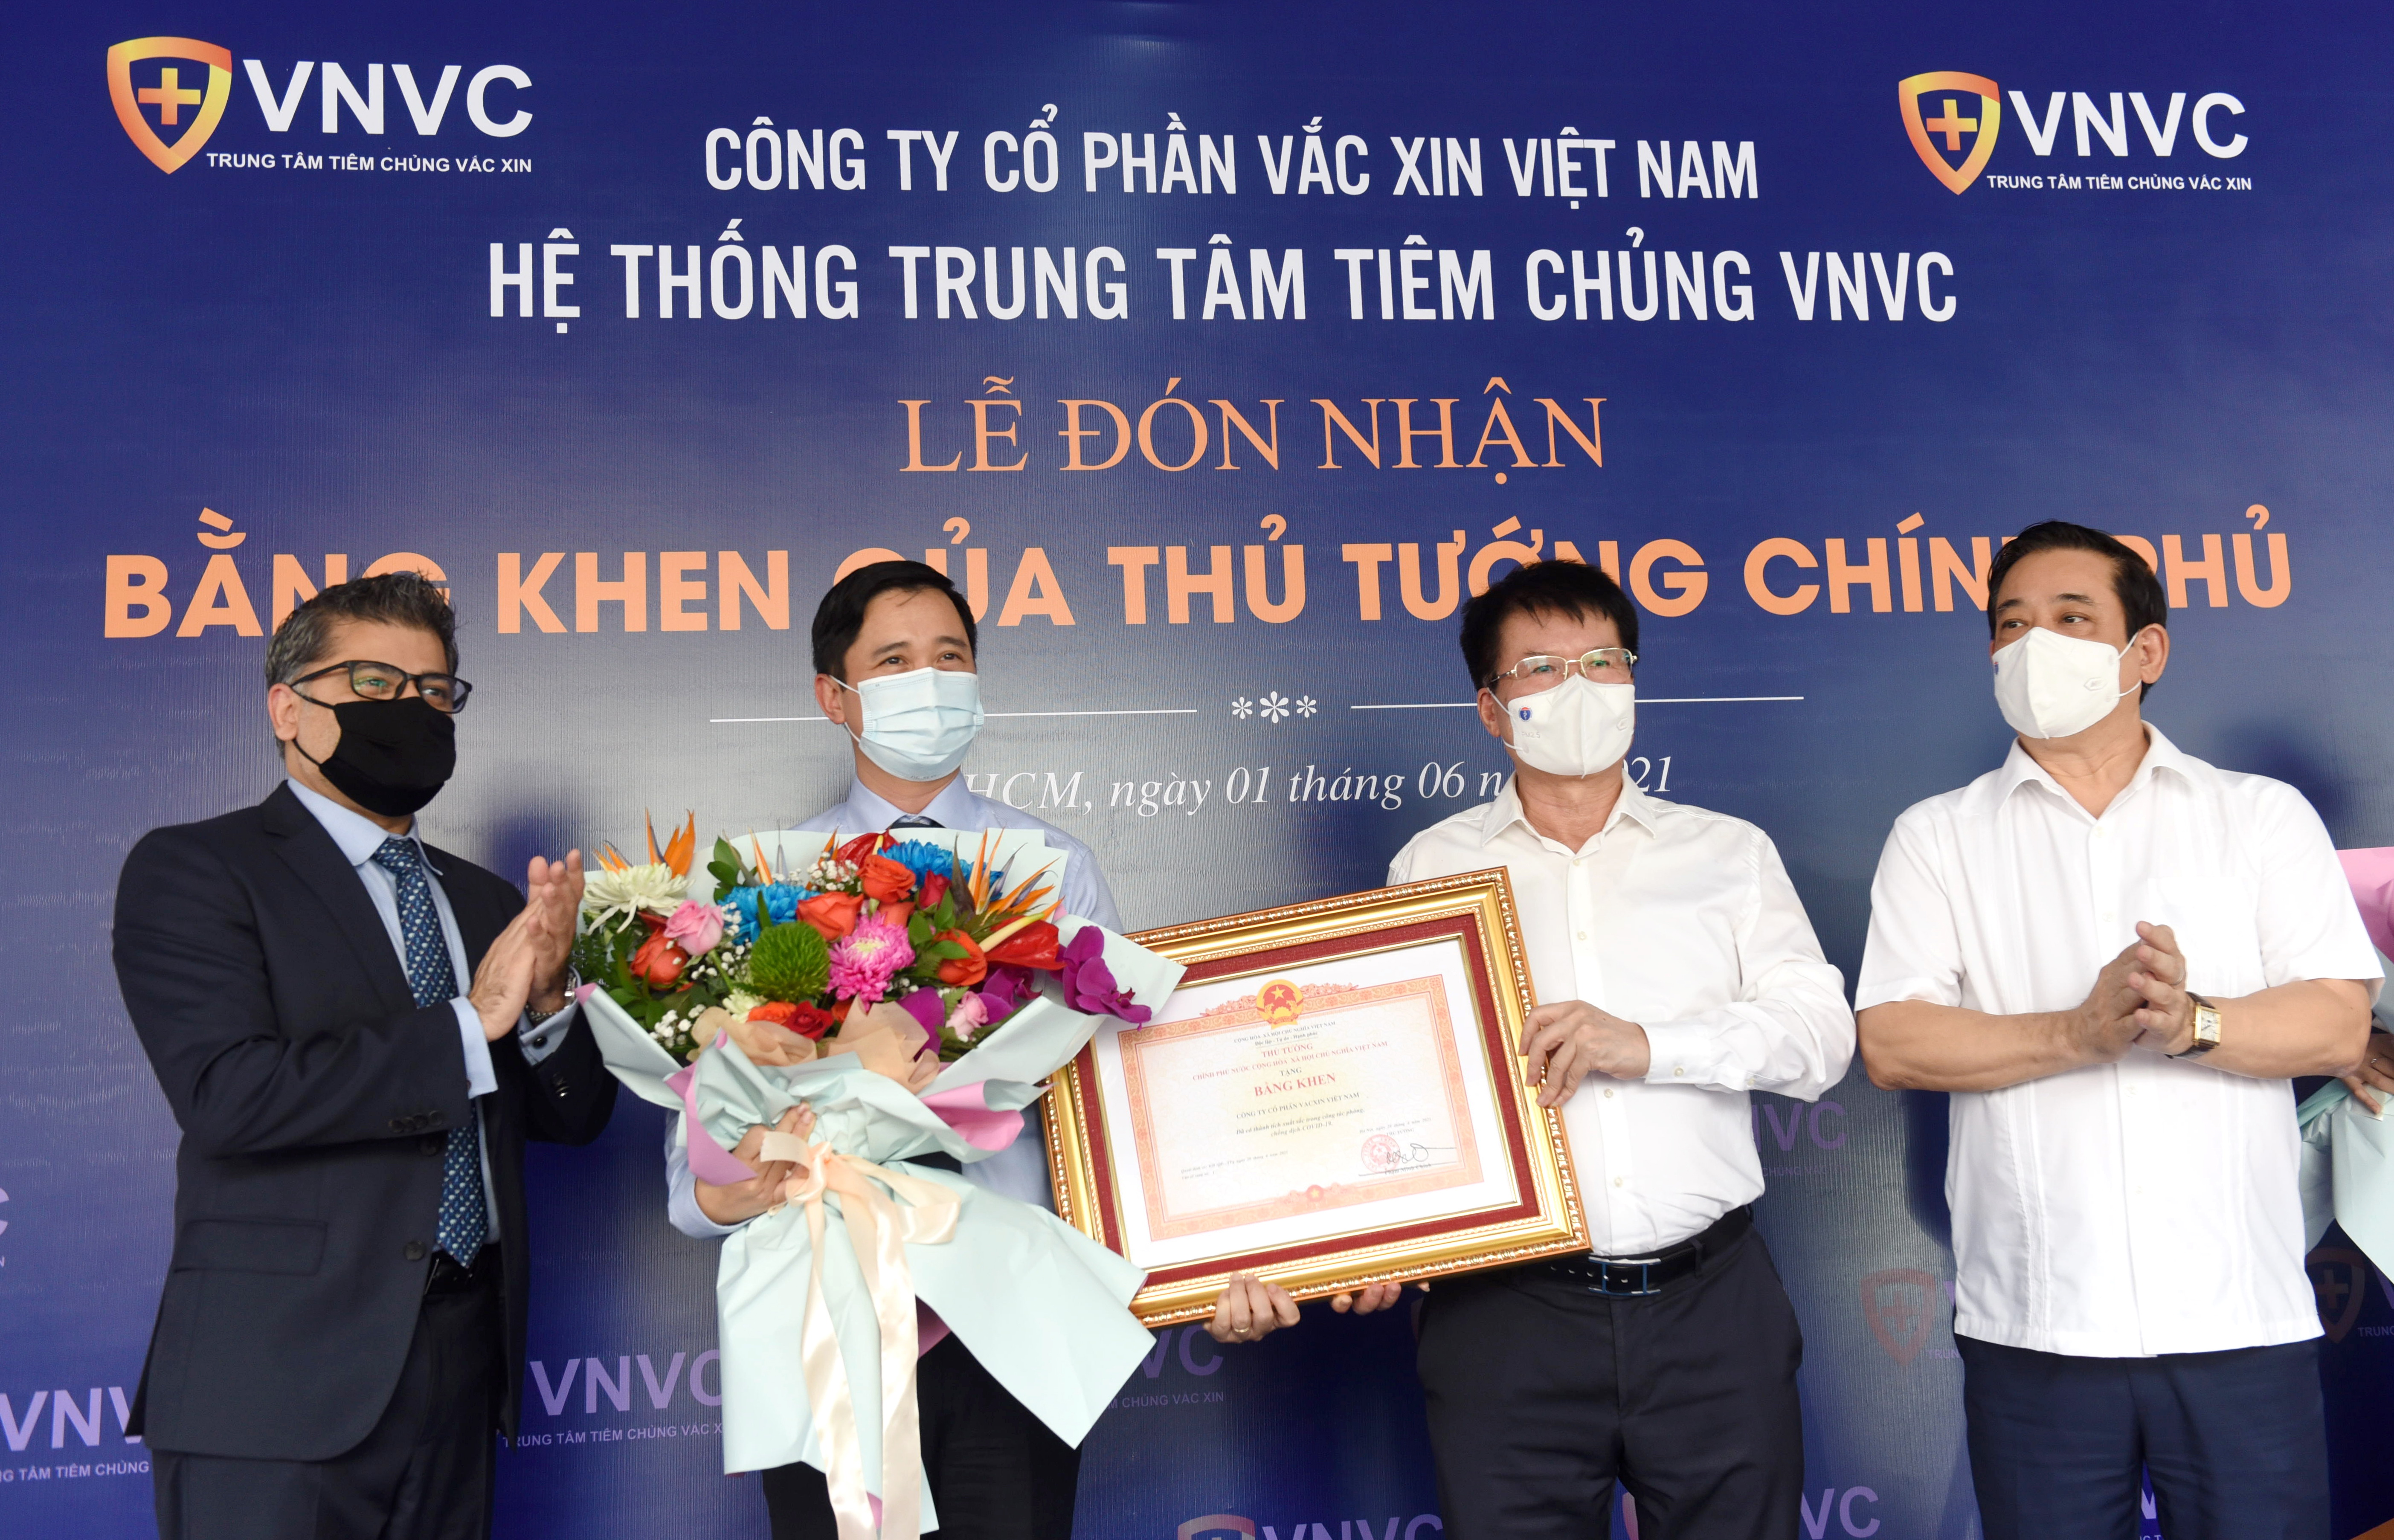 Vietnam vaccine company receives merits for helping fight COVID-19